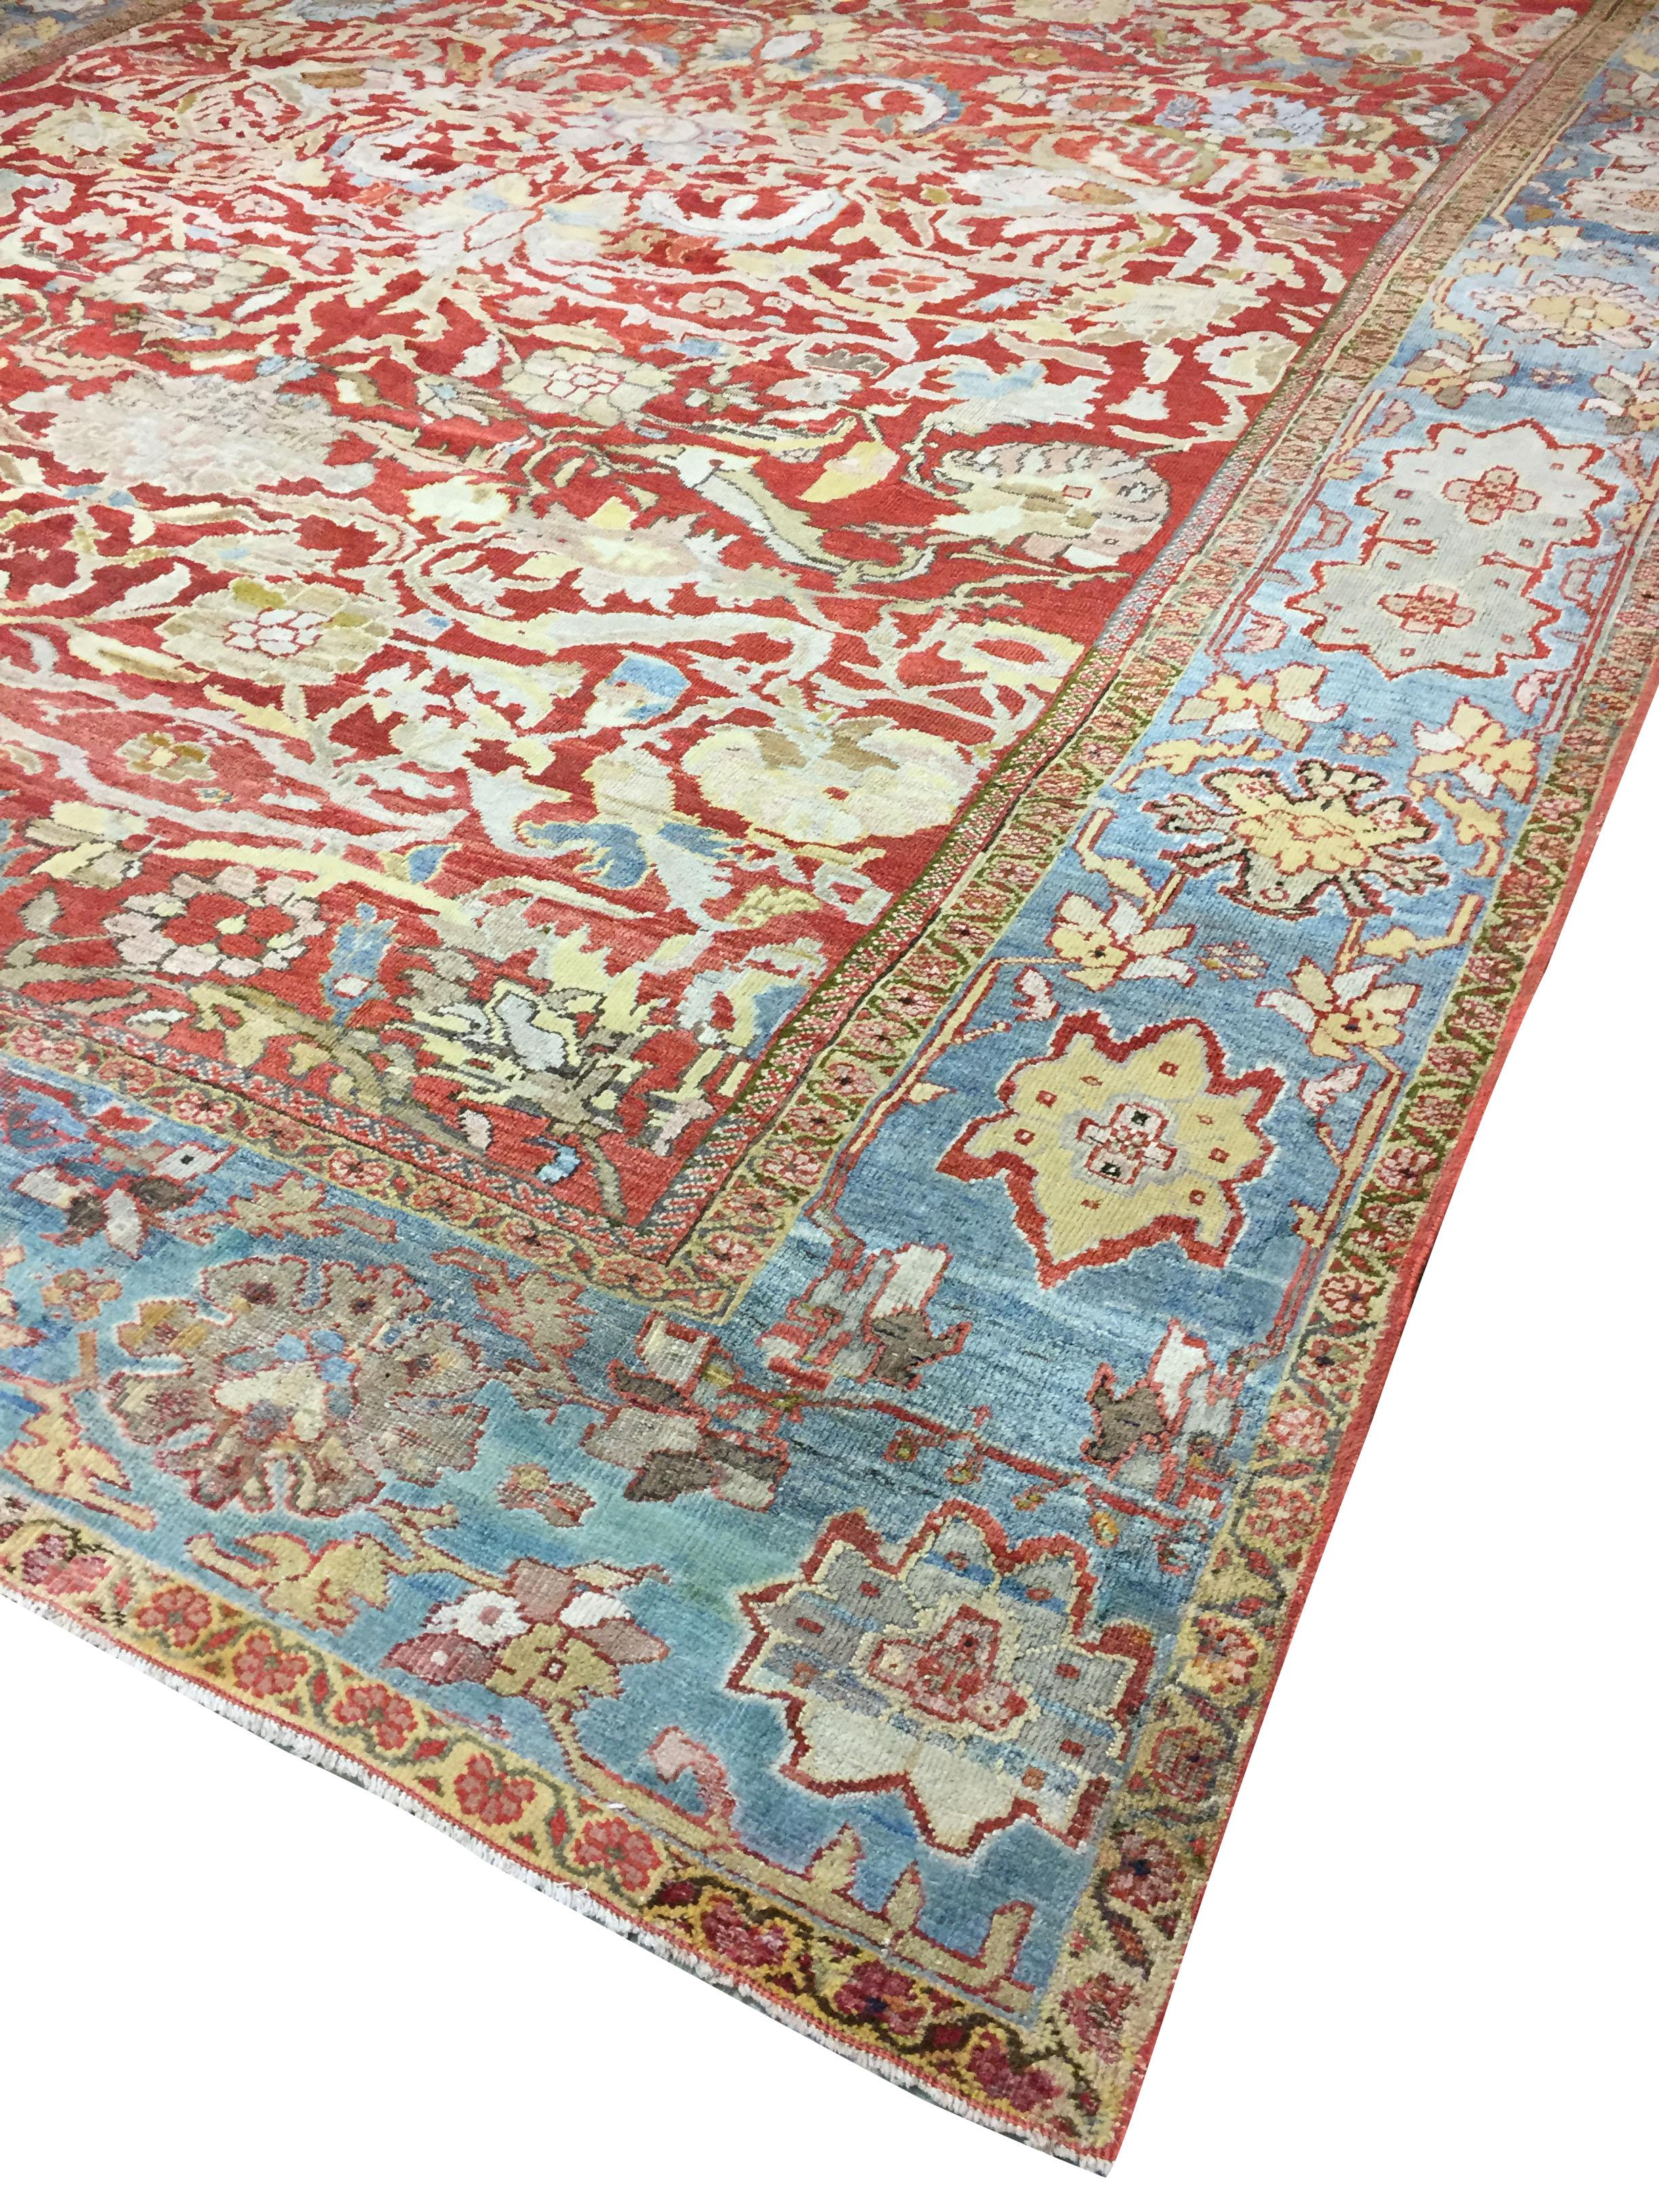 Antique Persian Ziegler Sultanabad Rug  12'6 x 14'6 For Sale 11